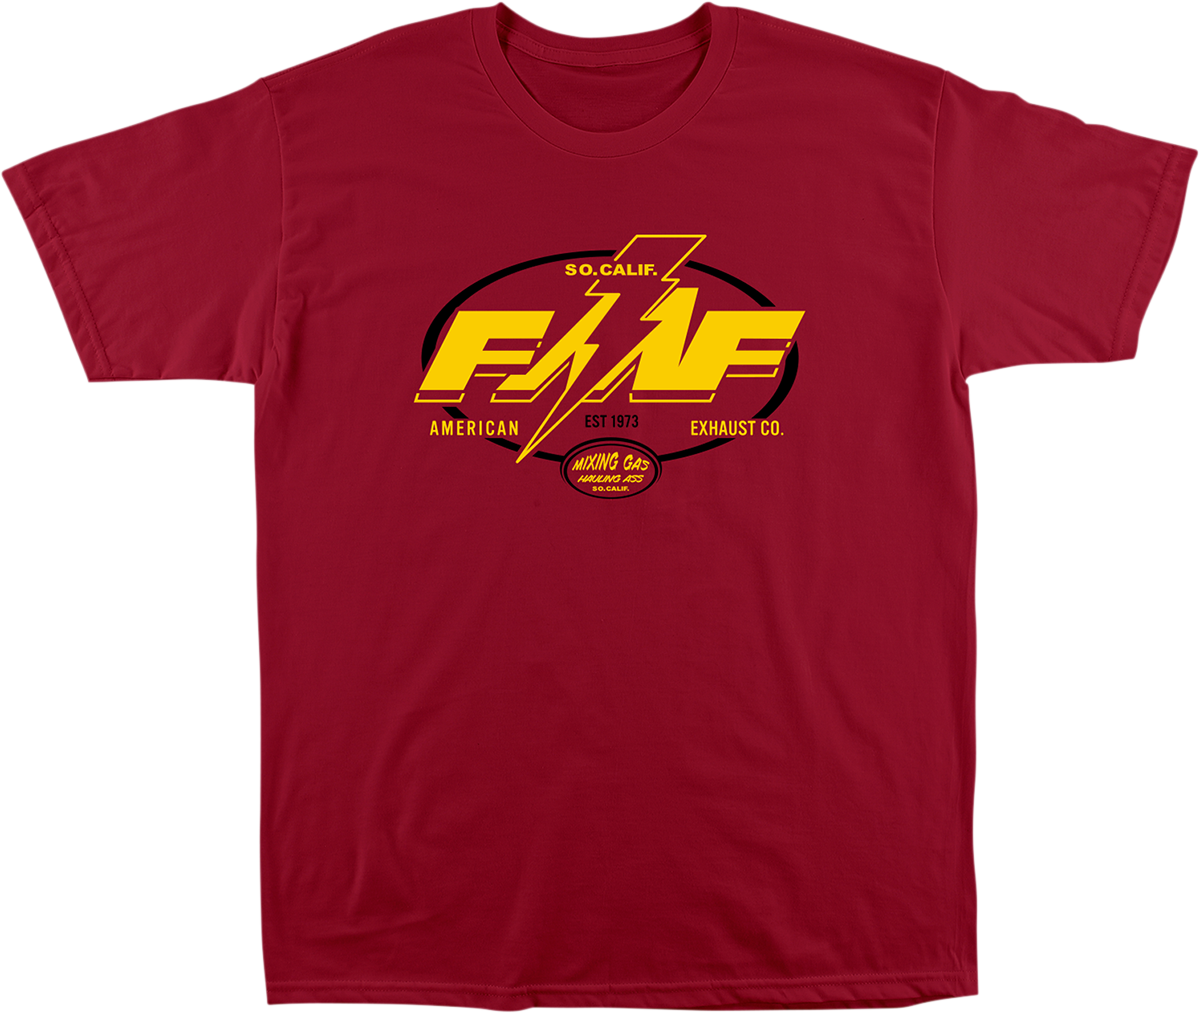 FMF Broadcast T-Shirt - Cardinal Red - Small SP20118901CARS 3030-19148